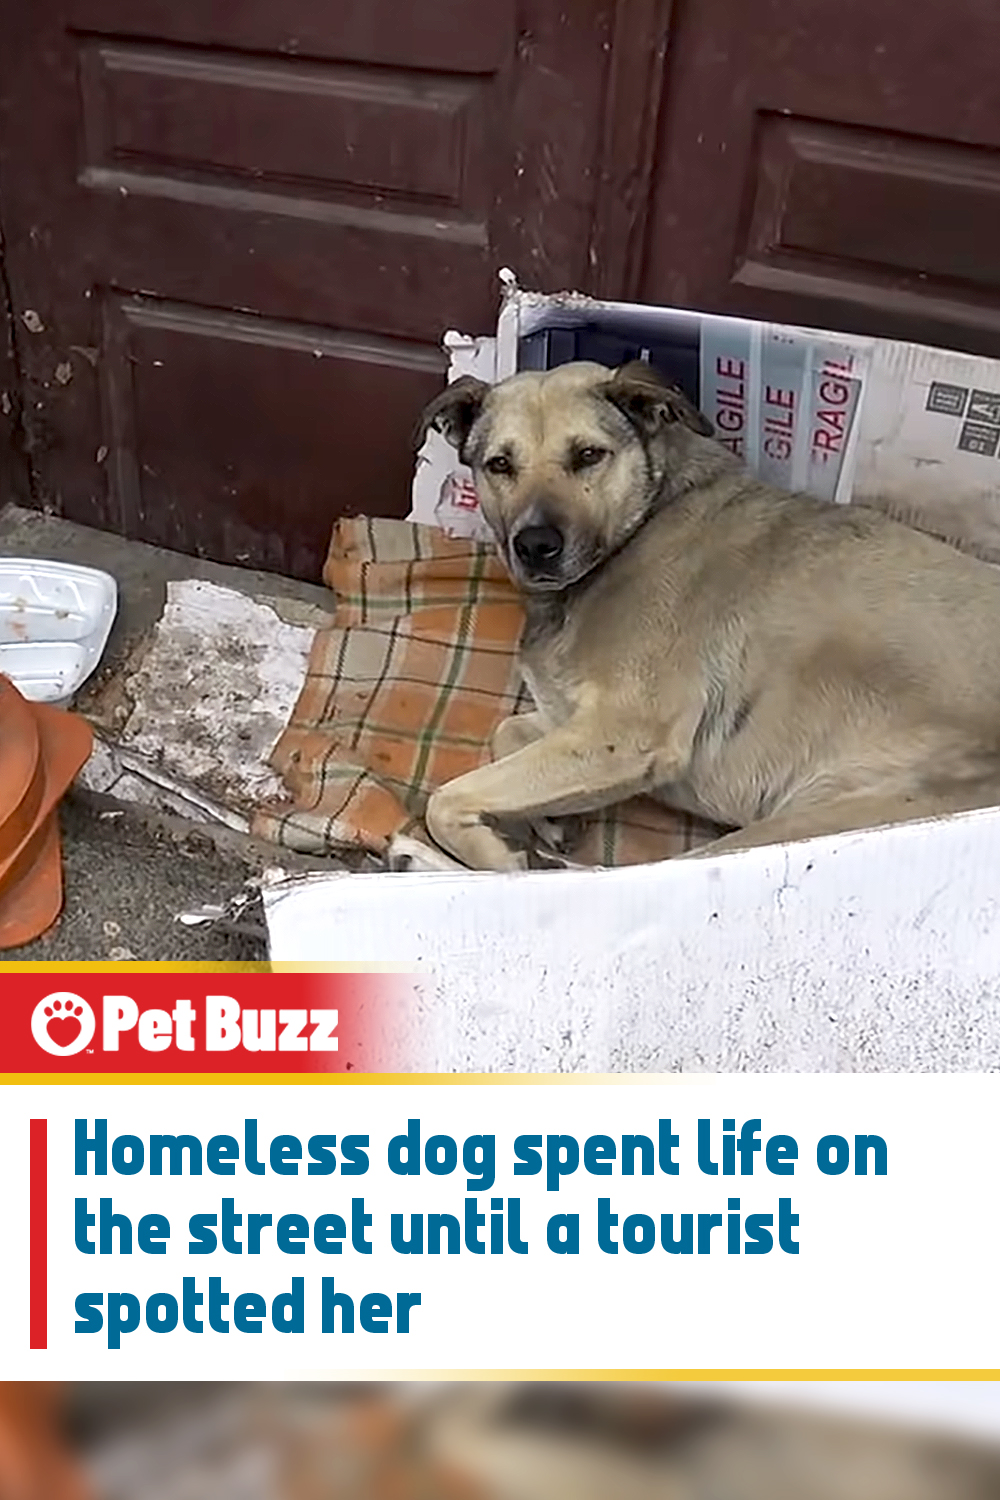 Homeless dog spent life on the street until a tourist spotted her